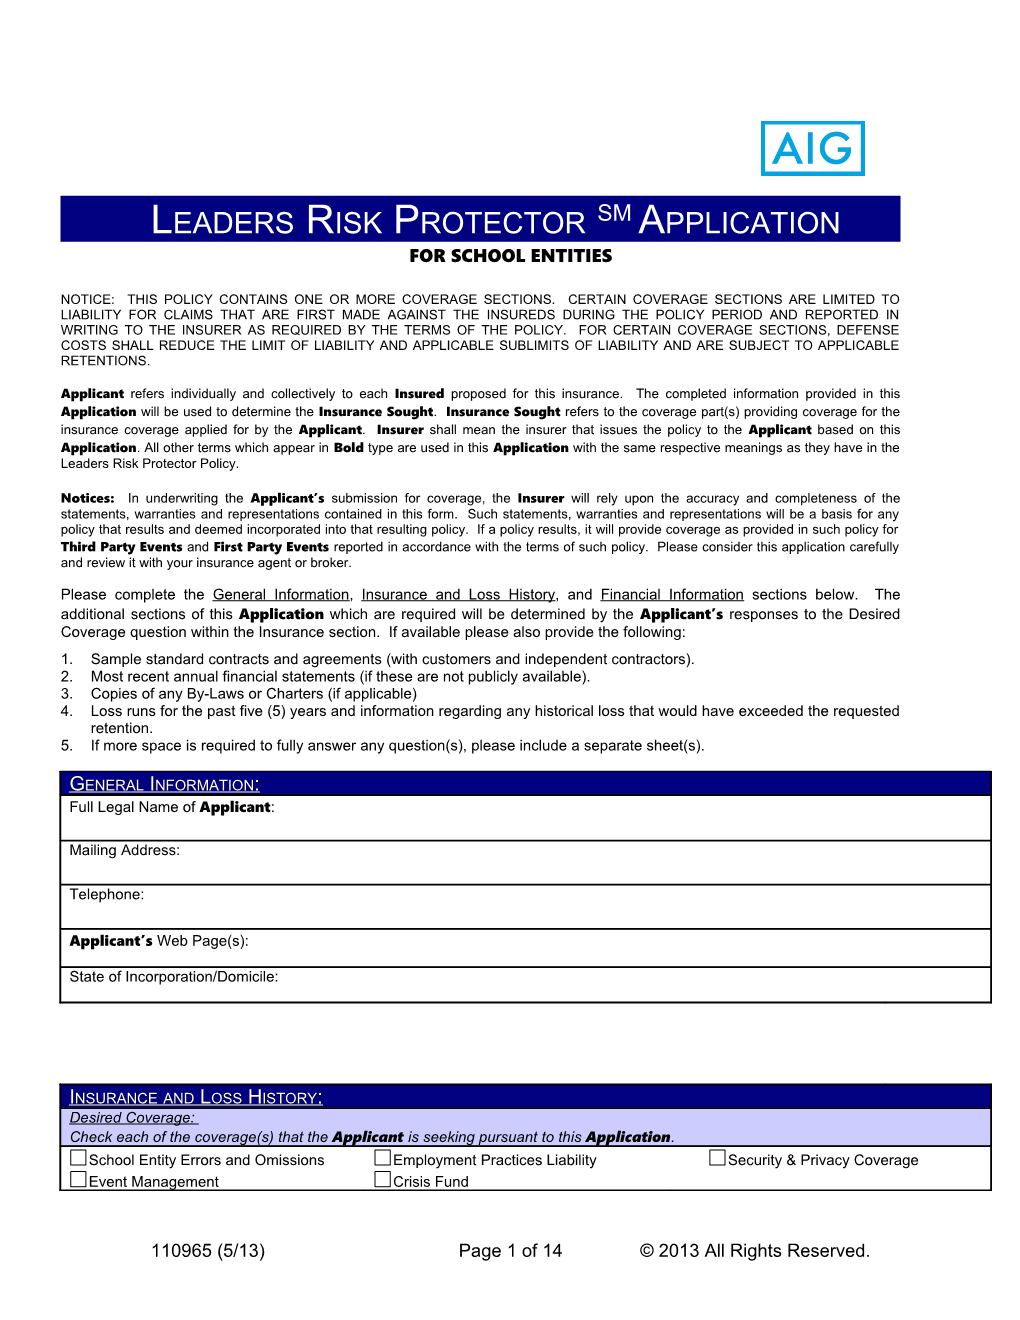 Leaders Risk Protector SM Application